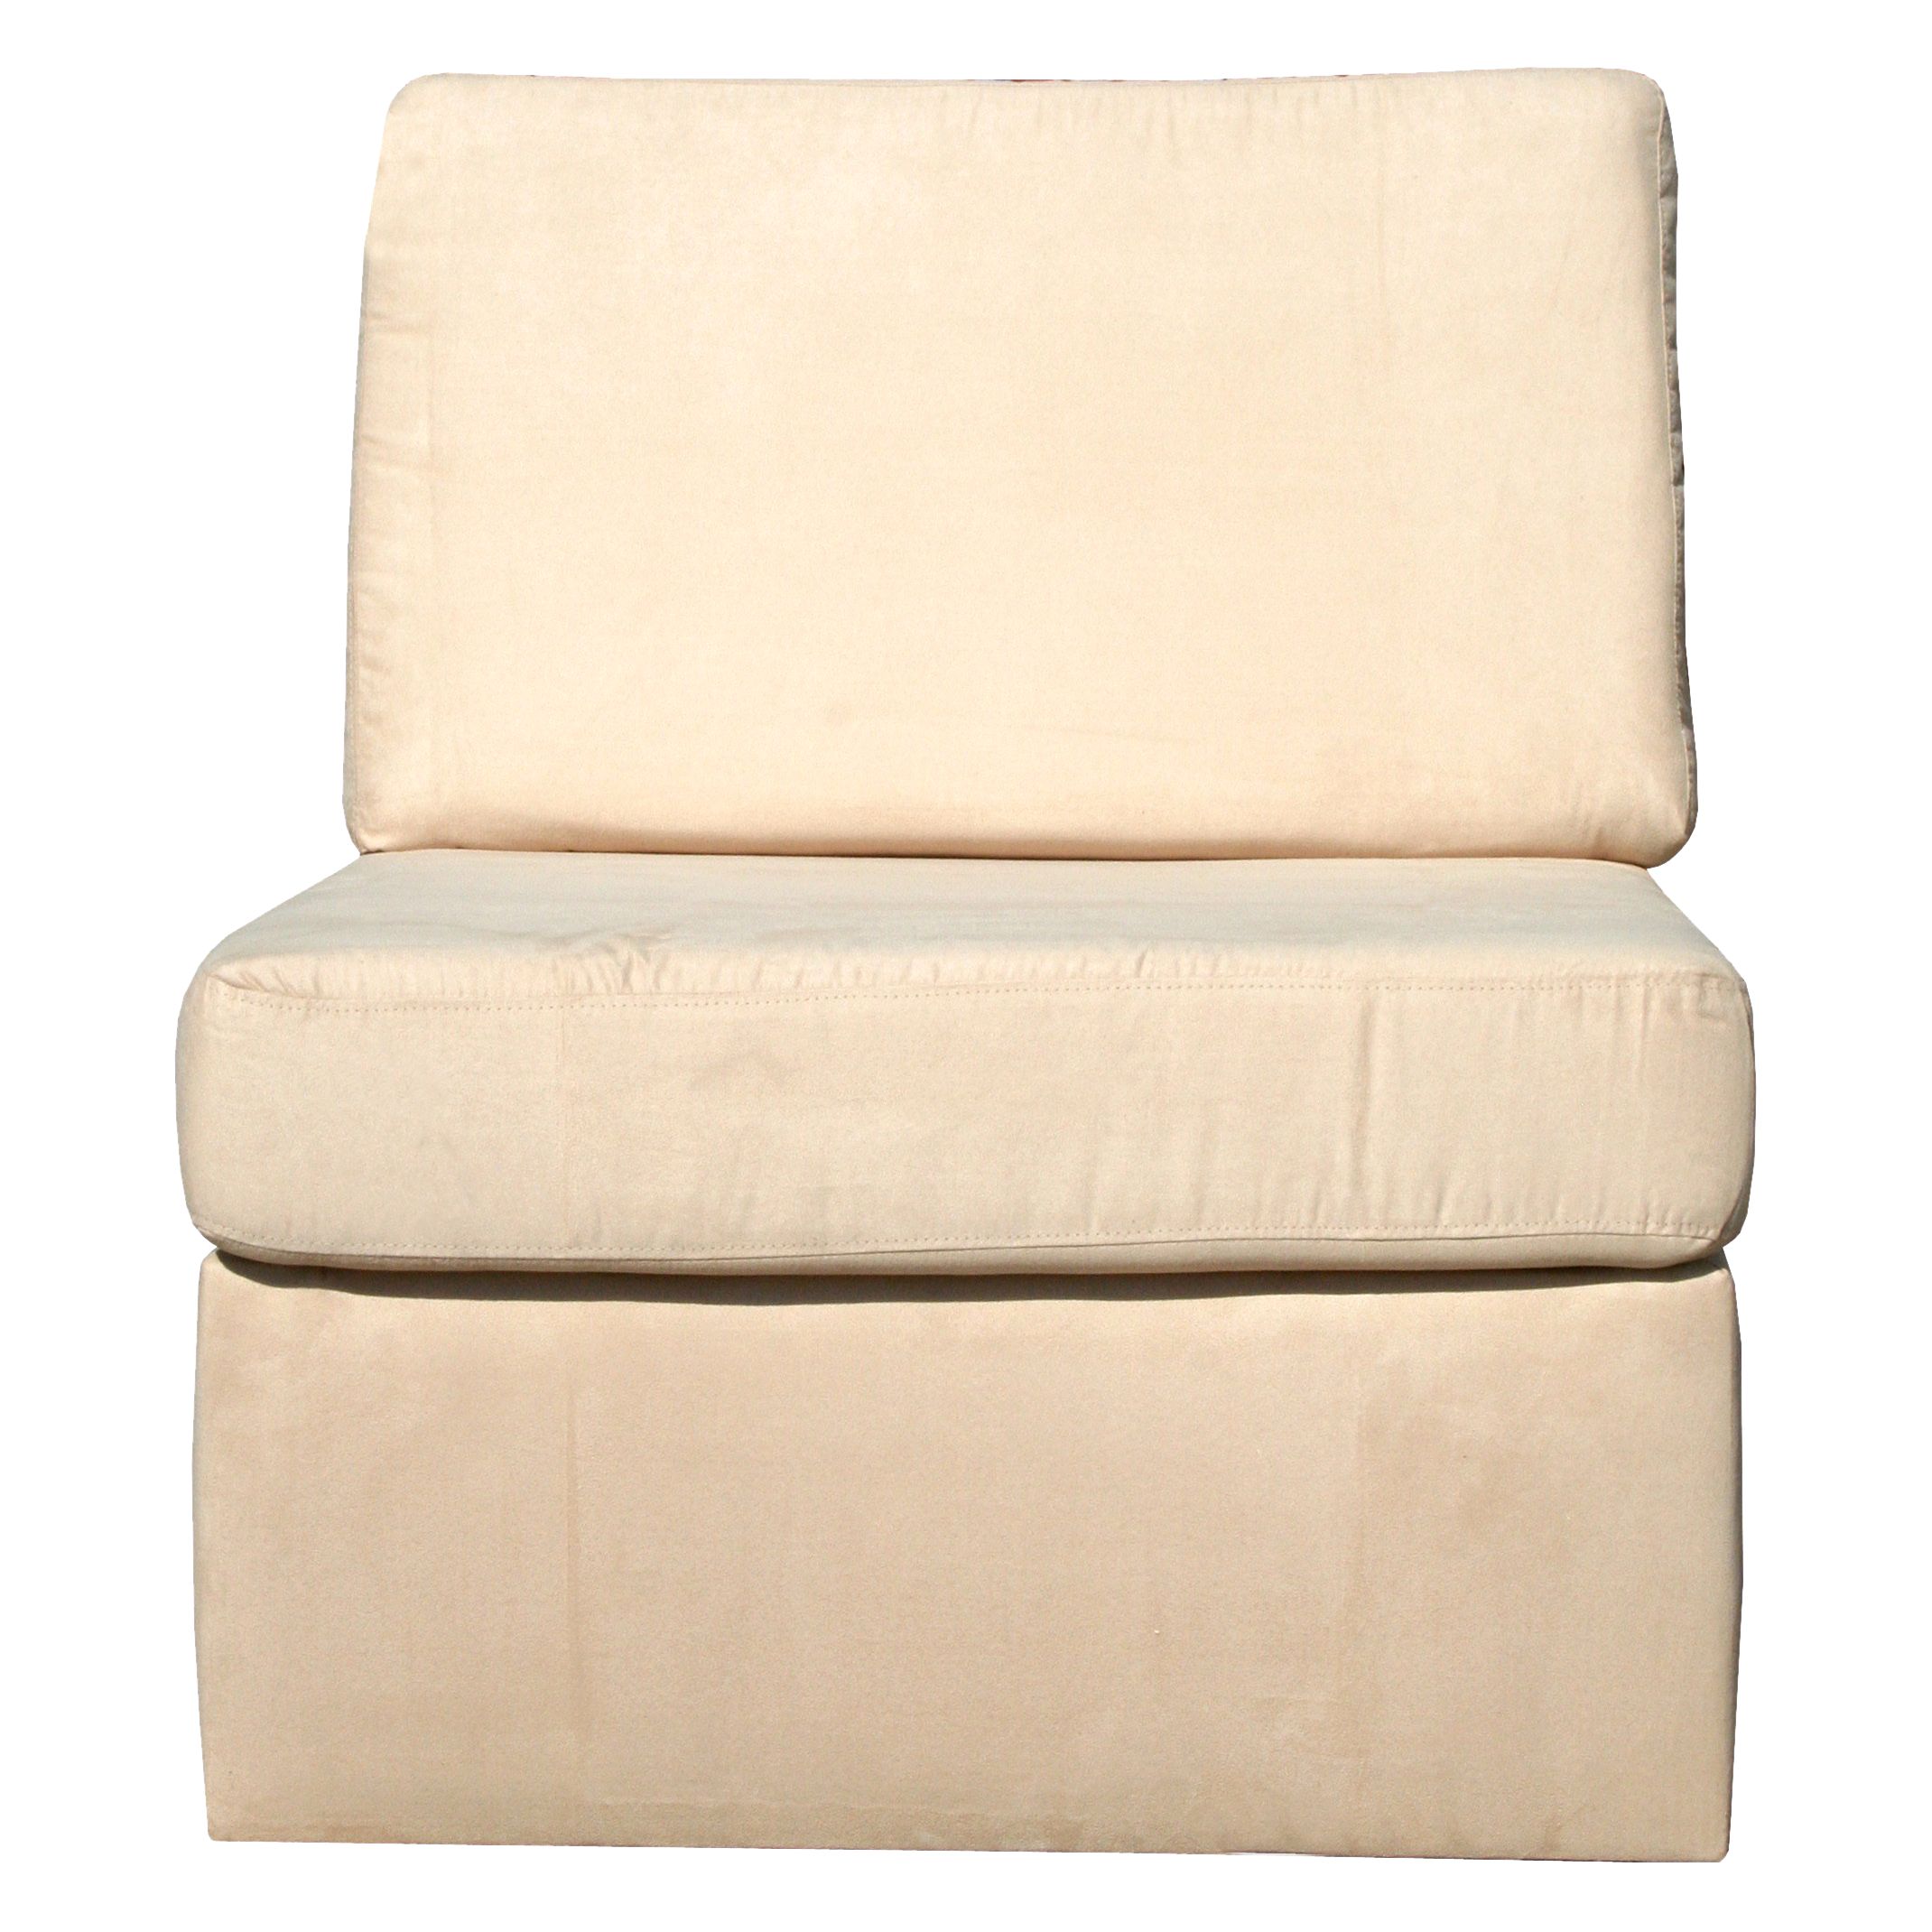 The Barney chairbed in beige features hardwood frame and feet as well ...